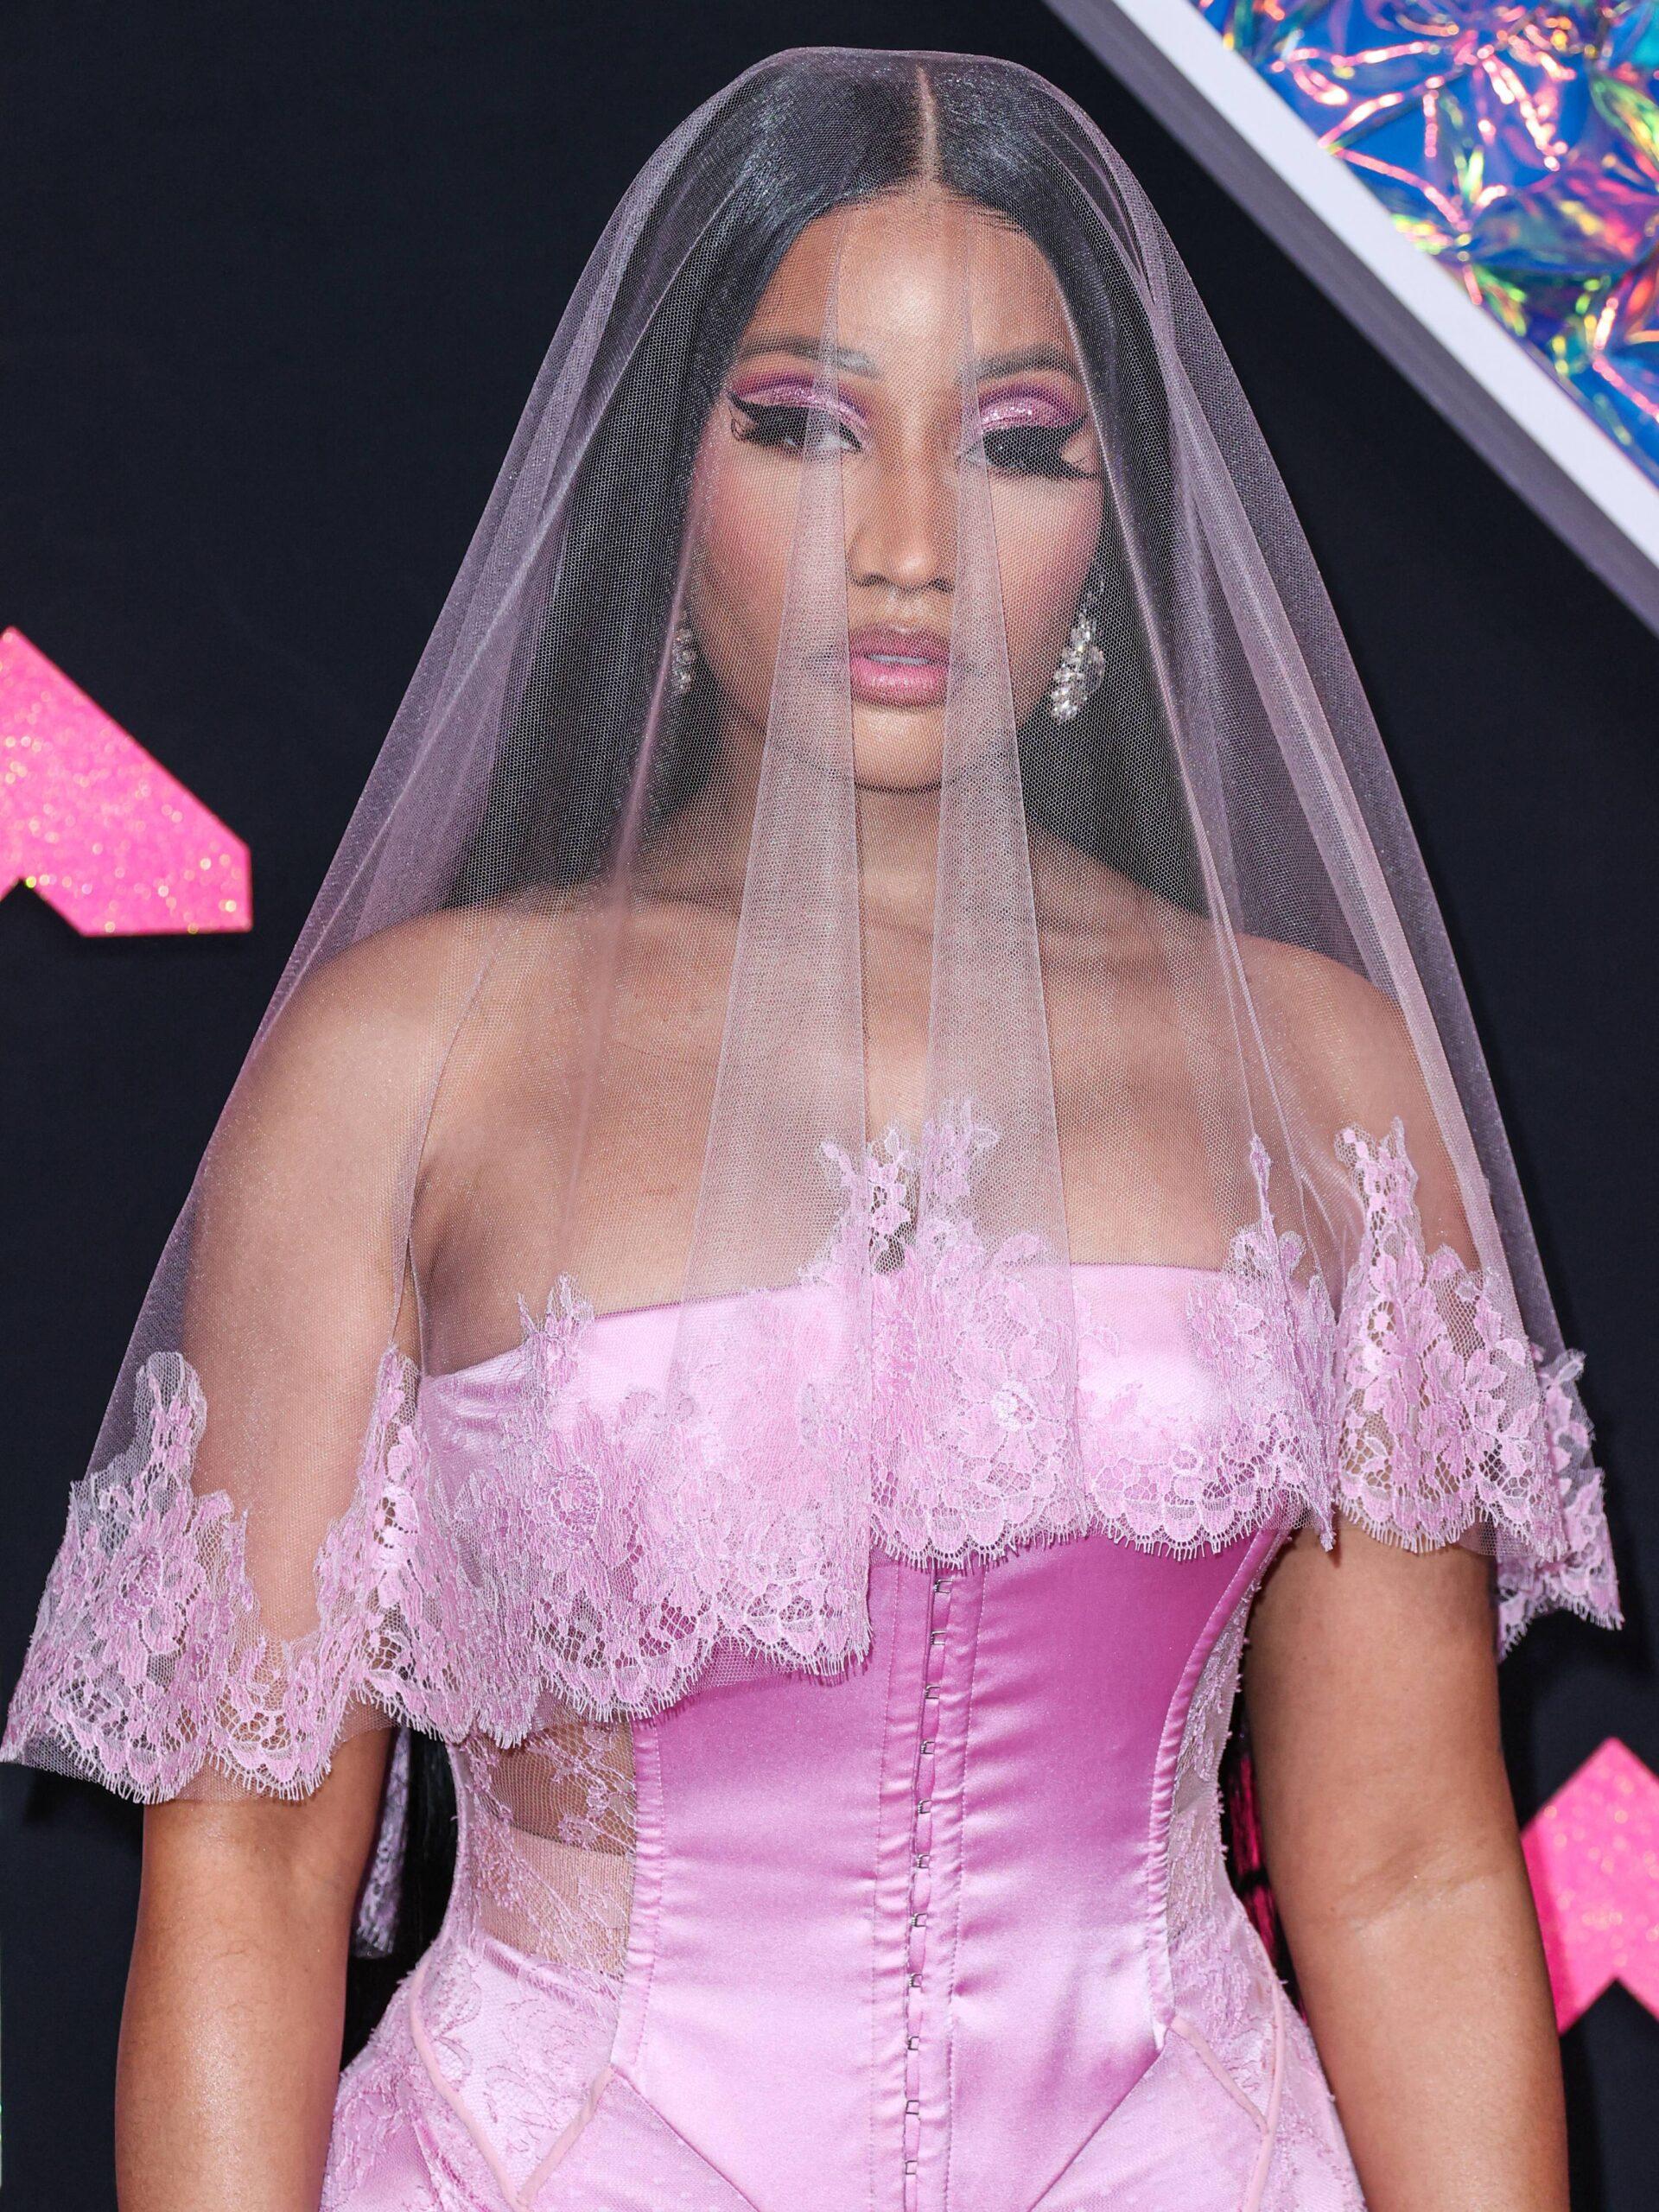 Nicki Minaj forced to get breast reduction as 'ti**ies wouldn't